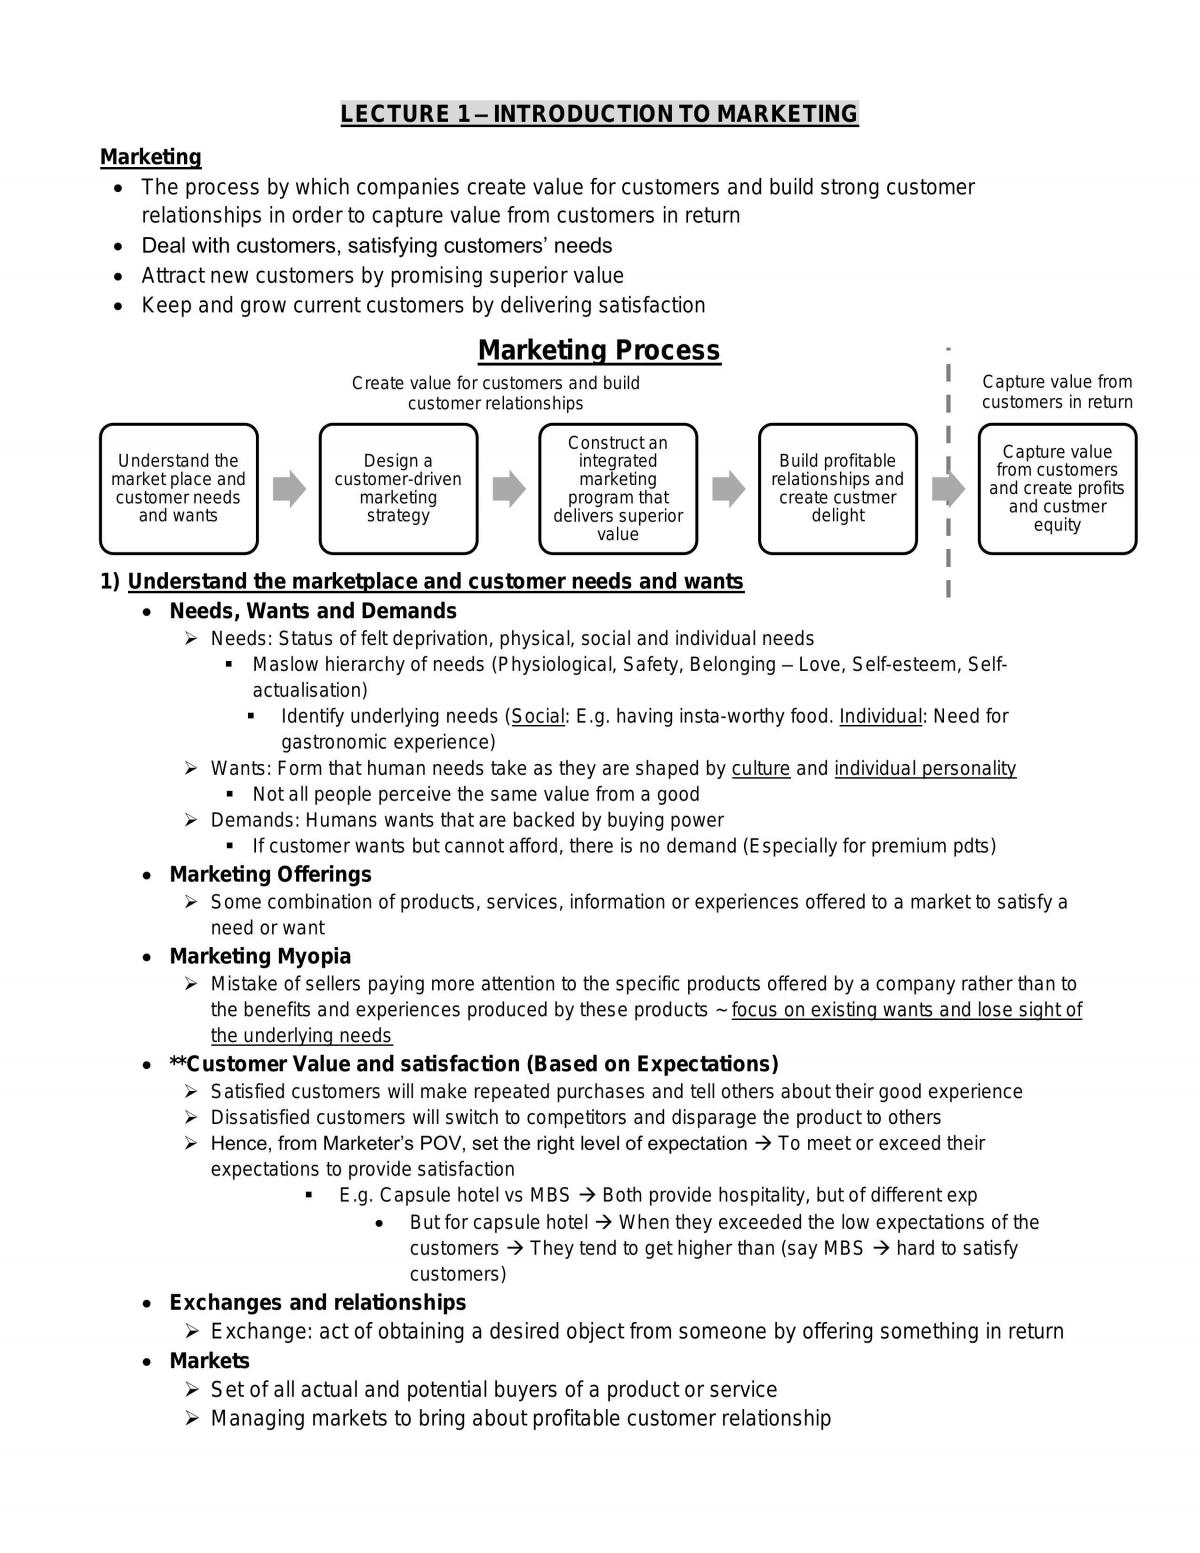 AB1501 - Marketing (Complete Guide) - Page 1